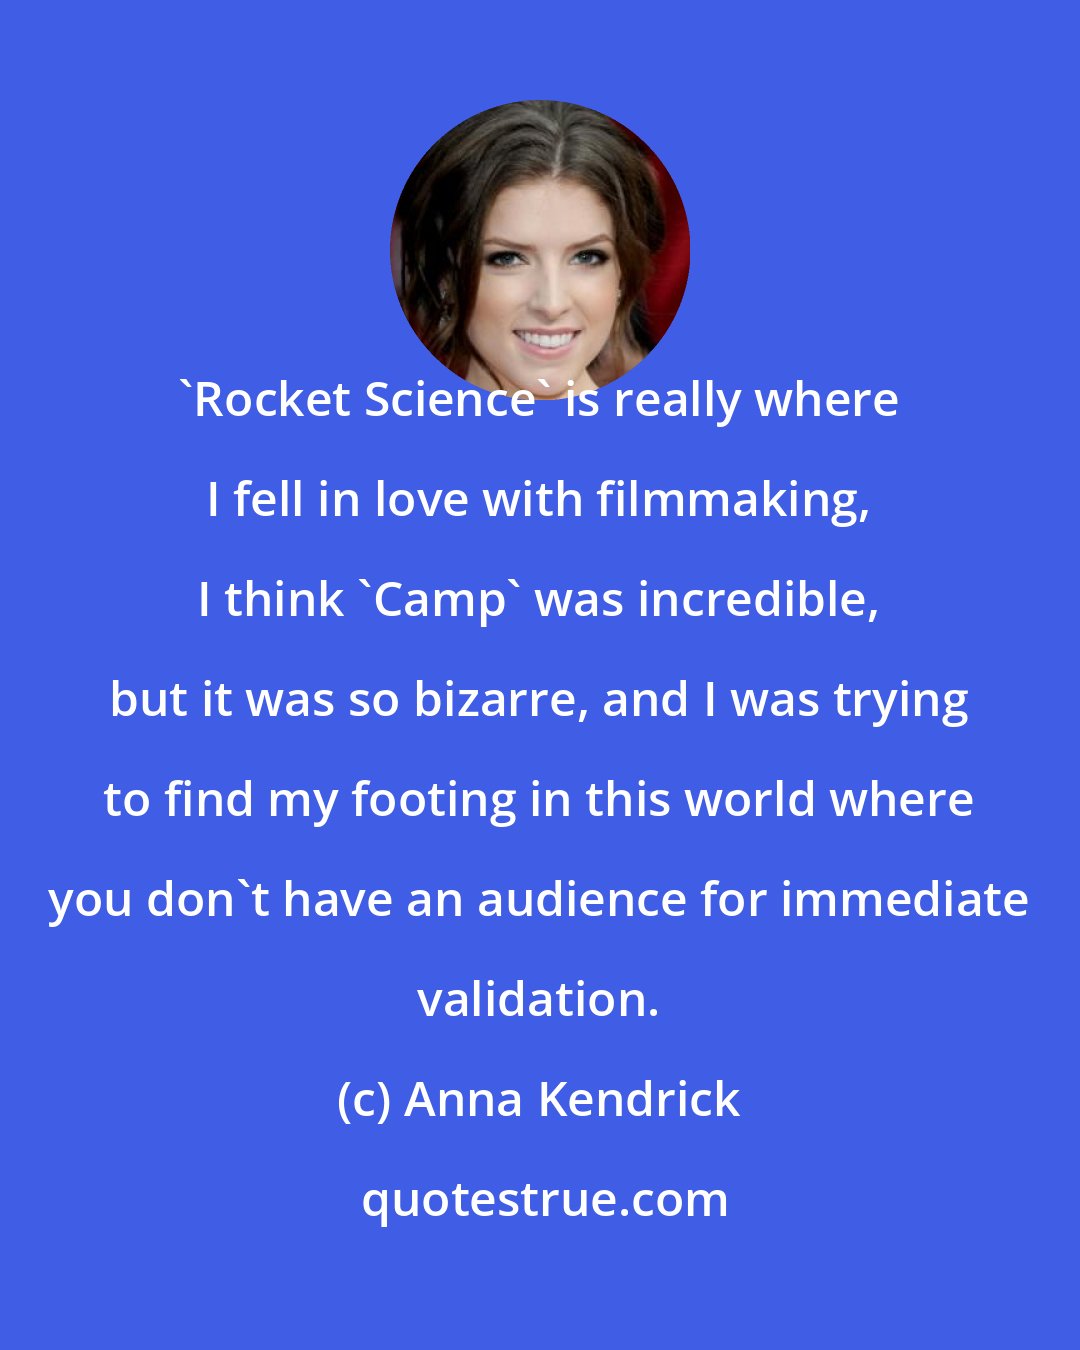 Anna Kendrick: 'Rocket Science' is really where I fell in love with filmmaking, I think 'Camp' was incredible, but it was so bizarre, and I was trying to find my footing in this world where you don't have an audience for immediate validation.